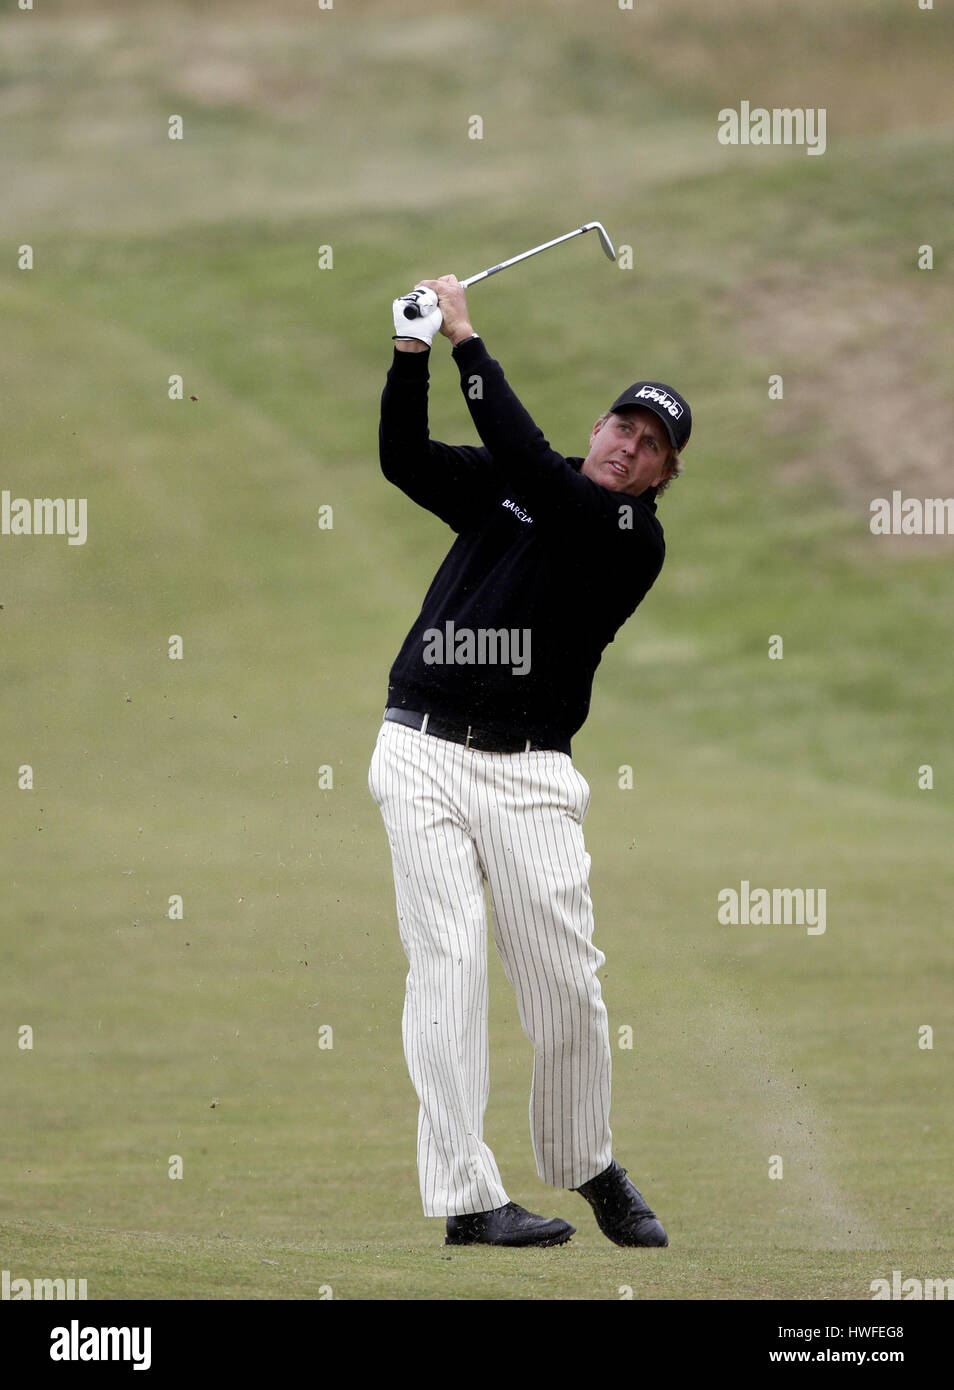 PHIL MICKELSON USA USA ROYAL ST.GEORGE'S SANDWICH KENT ENGLAND 14 July 2011 Stock Photo